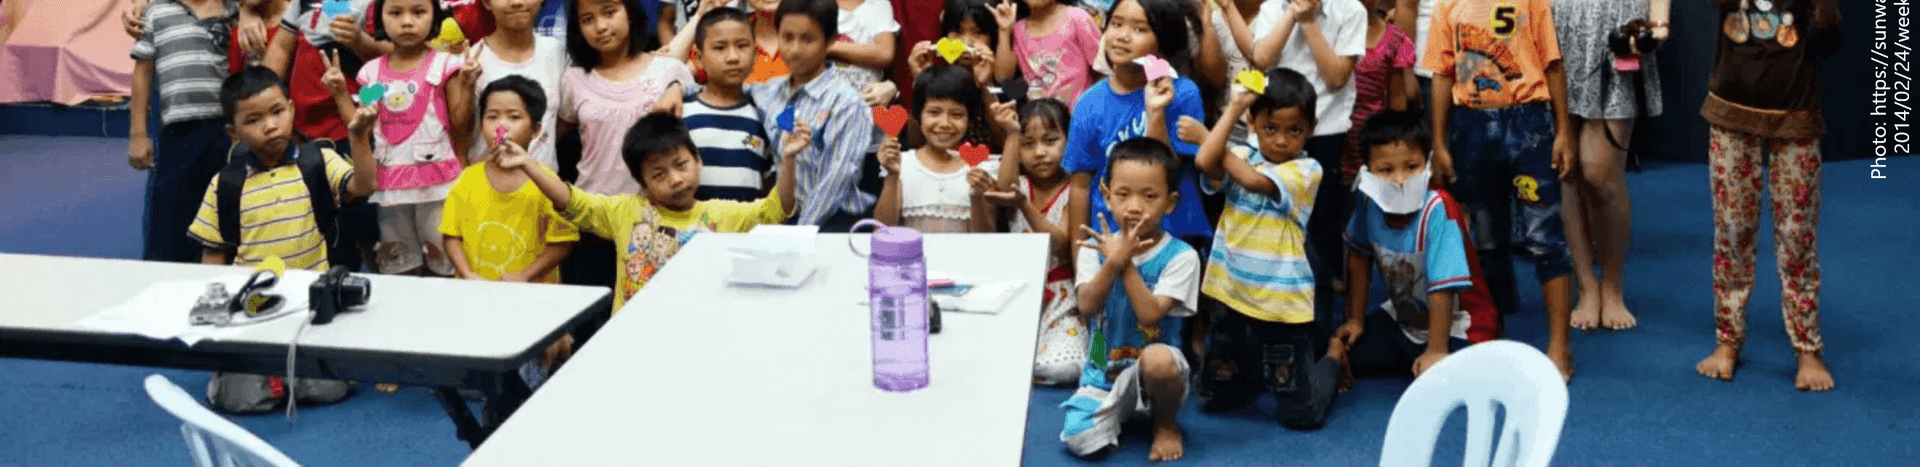 Refugee Children in Malaysia learning via mySecondTeacher(MST)